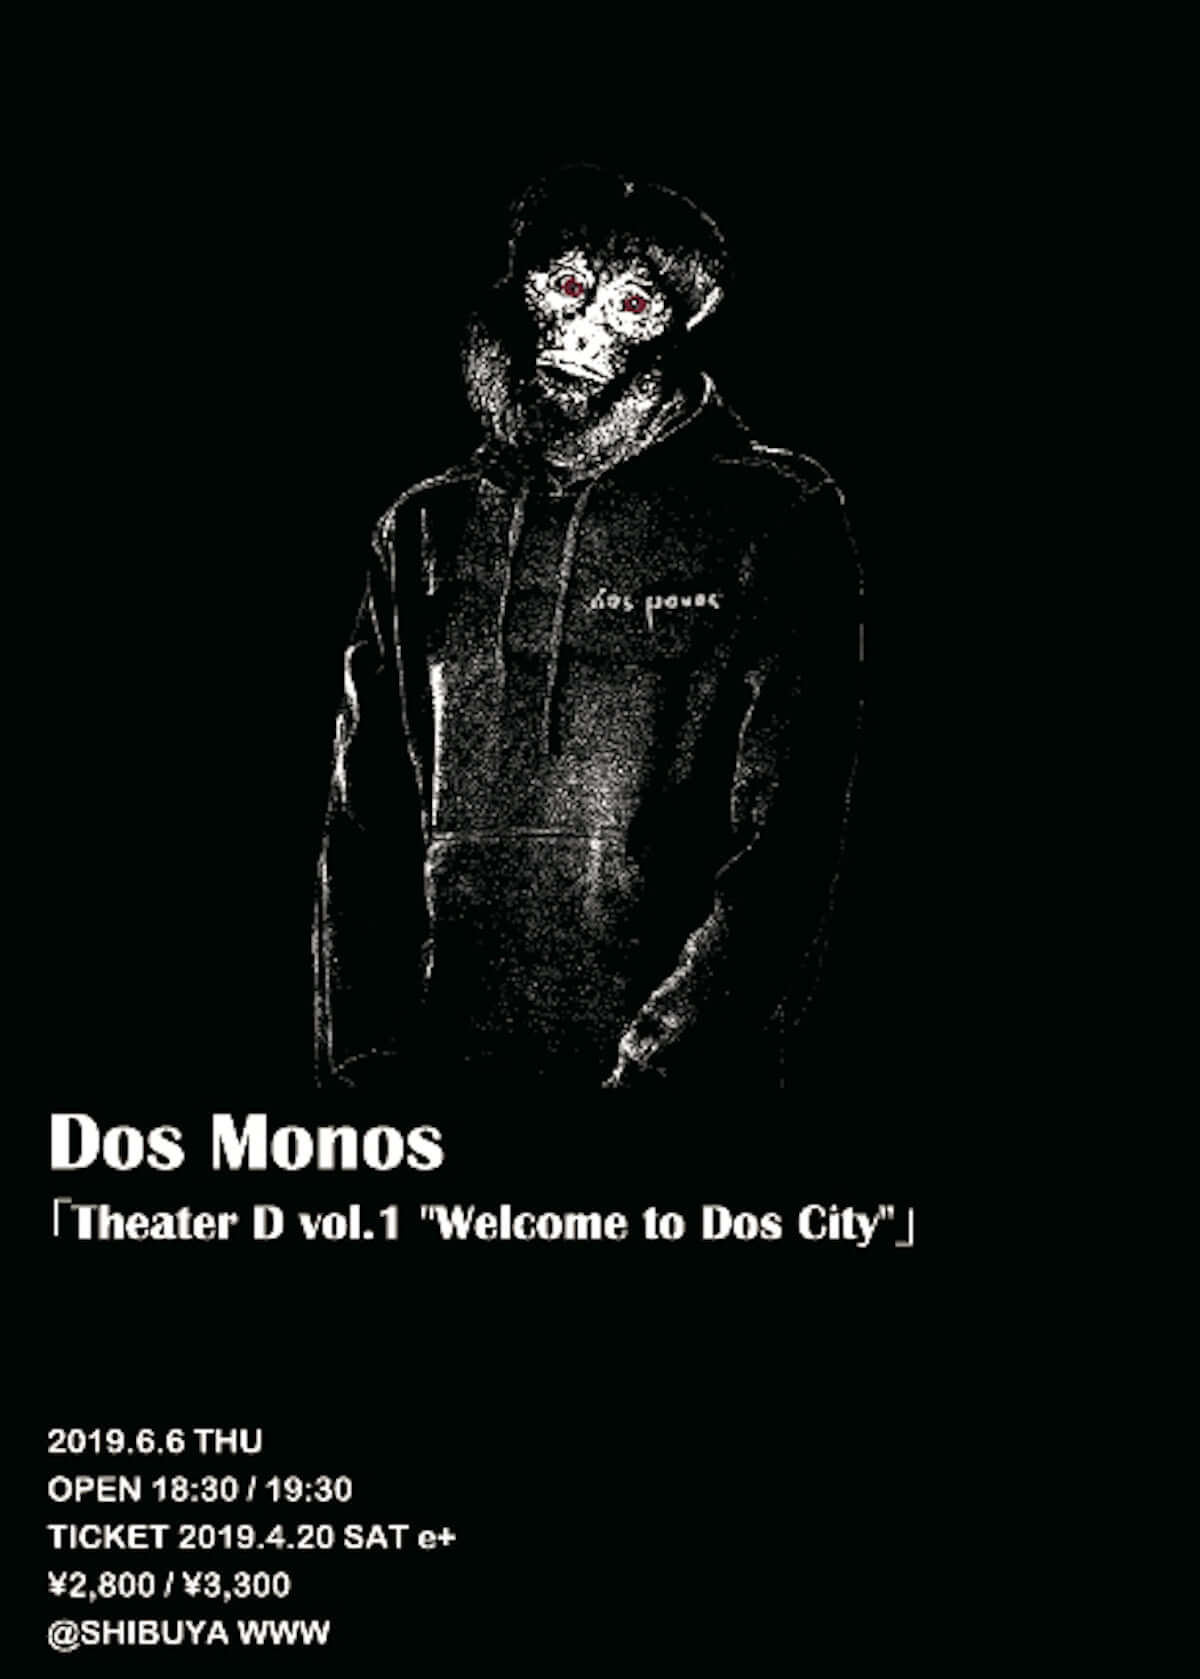 『Dos City』を発売したDos Monosがリリースパーティー＜Theater D vol.1 ”Welcome to Dos City”＞を開催 music190418_dosmonos_main-1200x1679